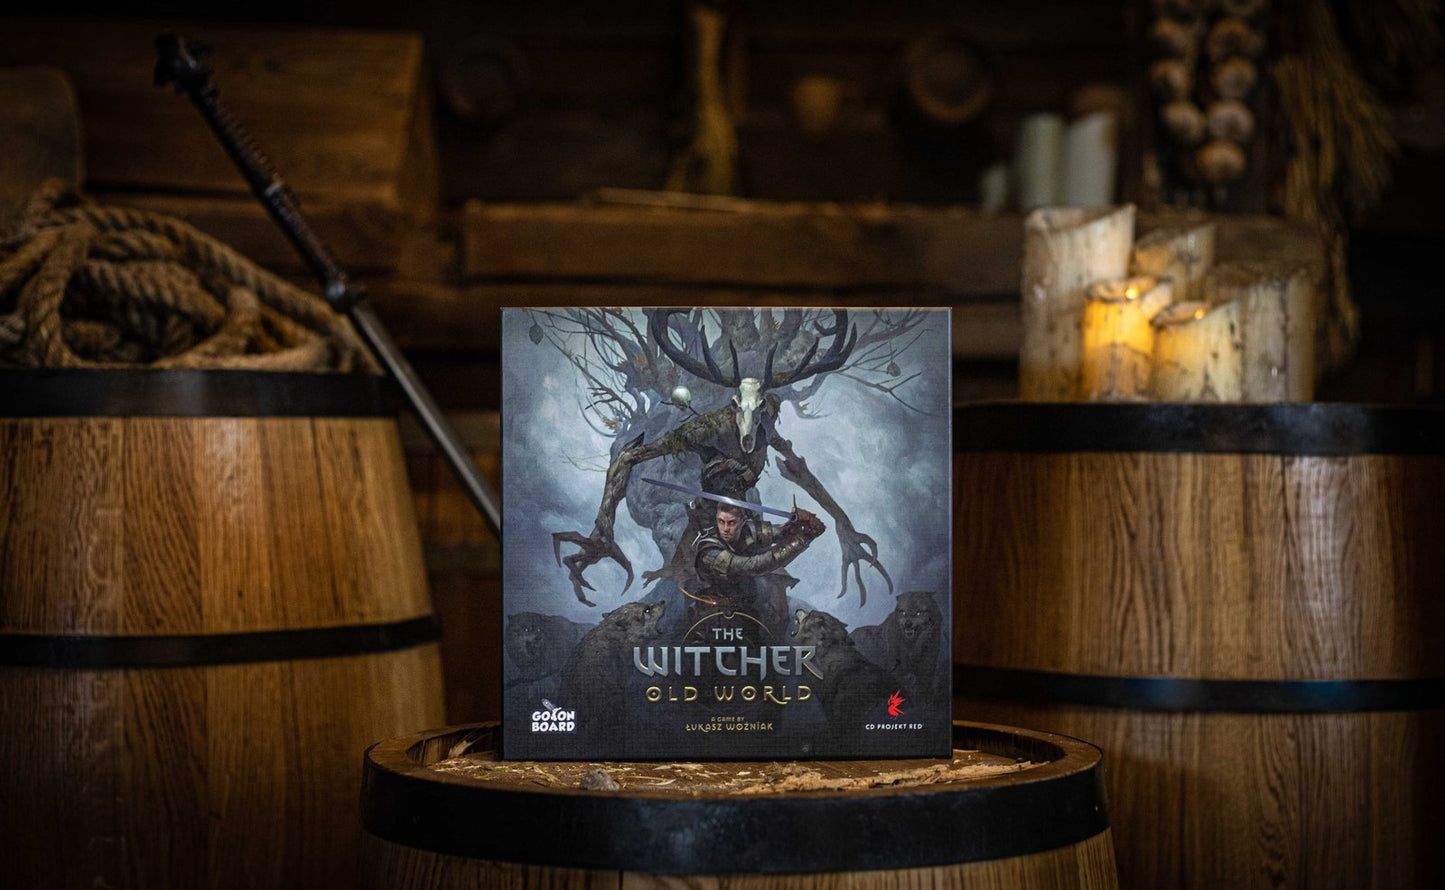 The Witcher: Old World Board Game (SWE)